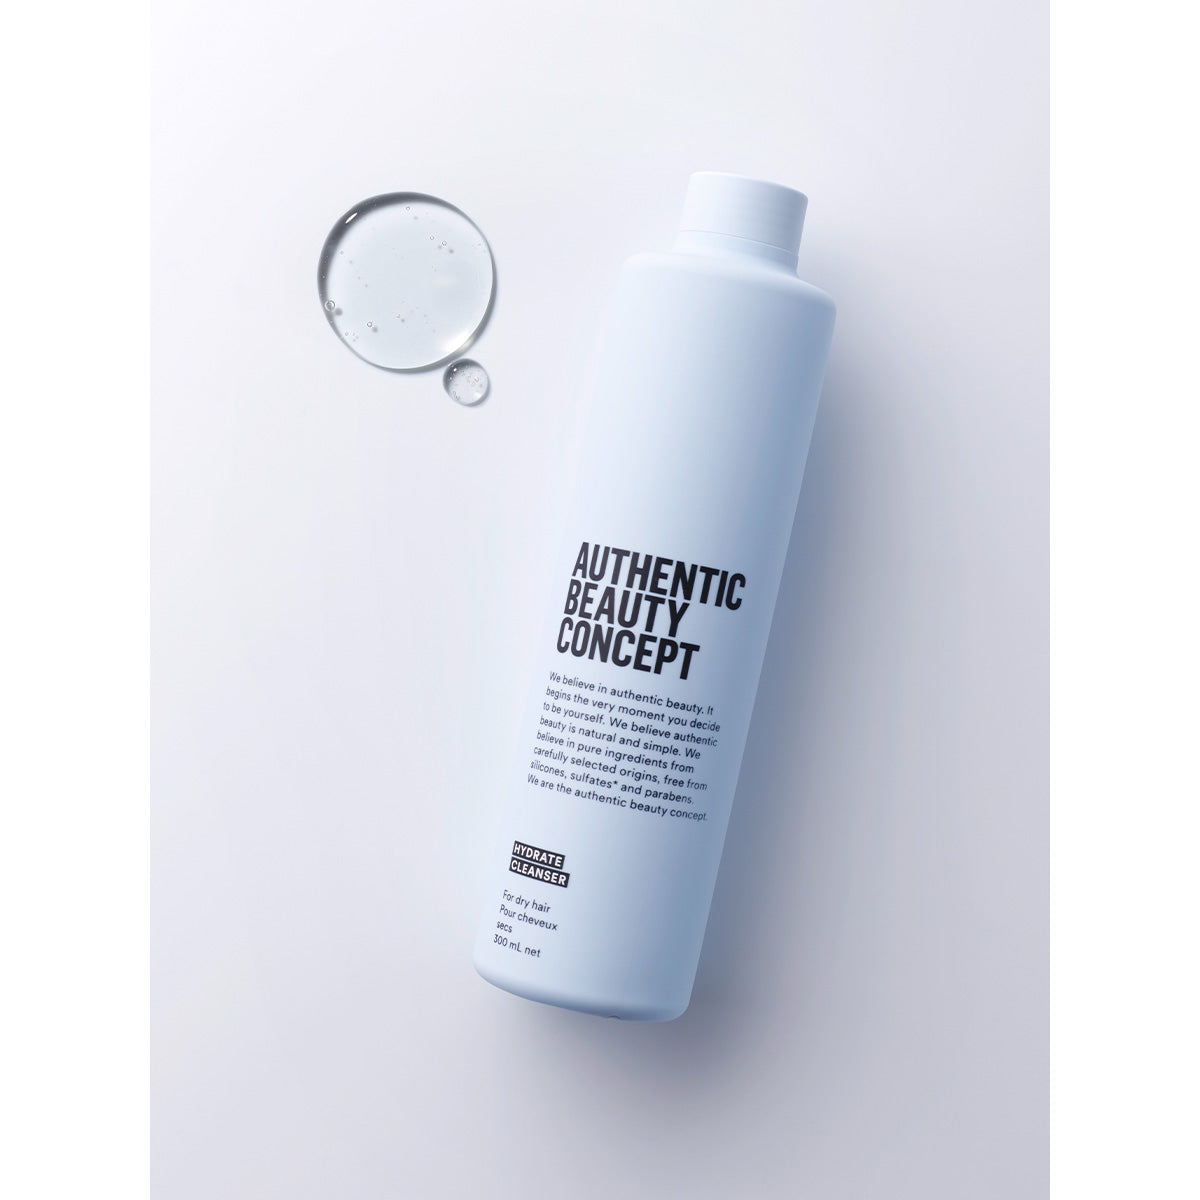 Hydrate Cleanser-Authentic Beauty Concept